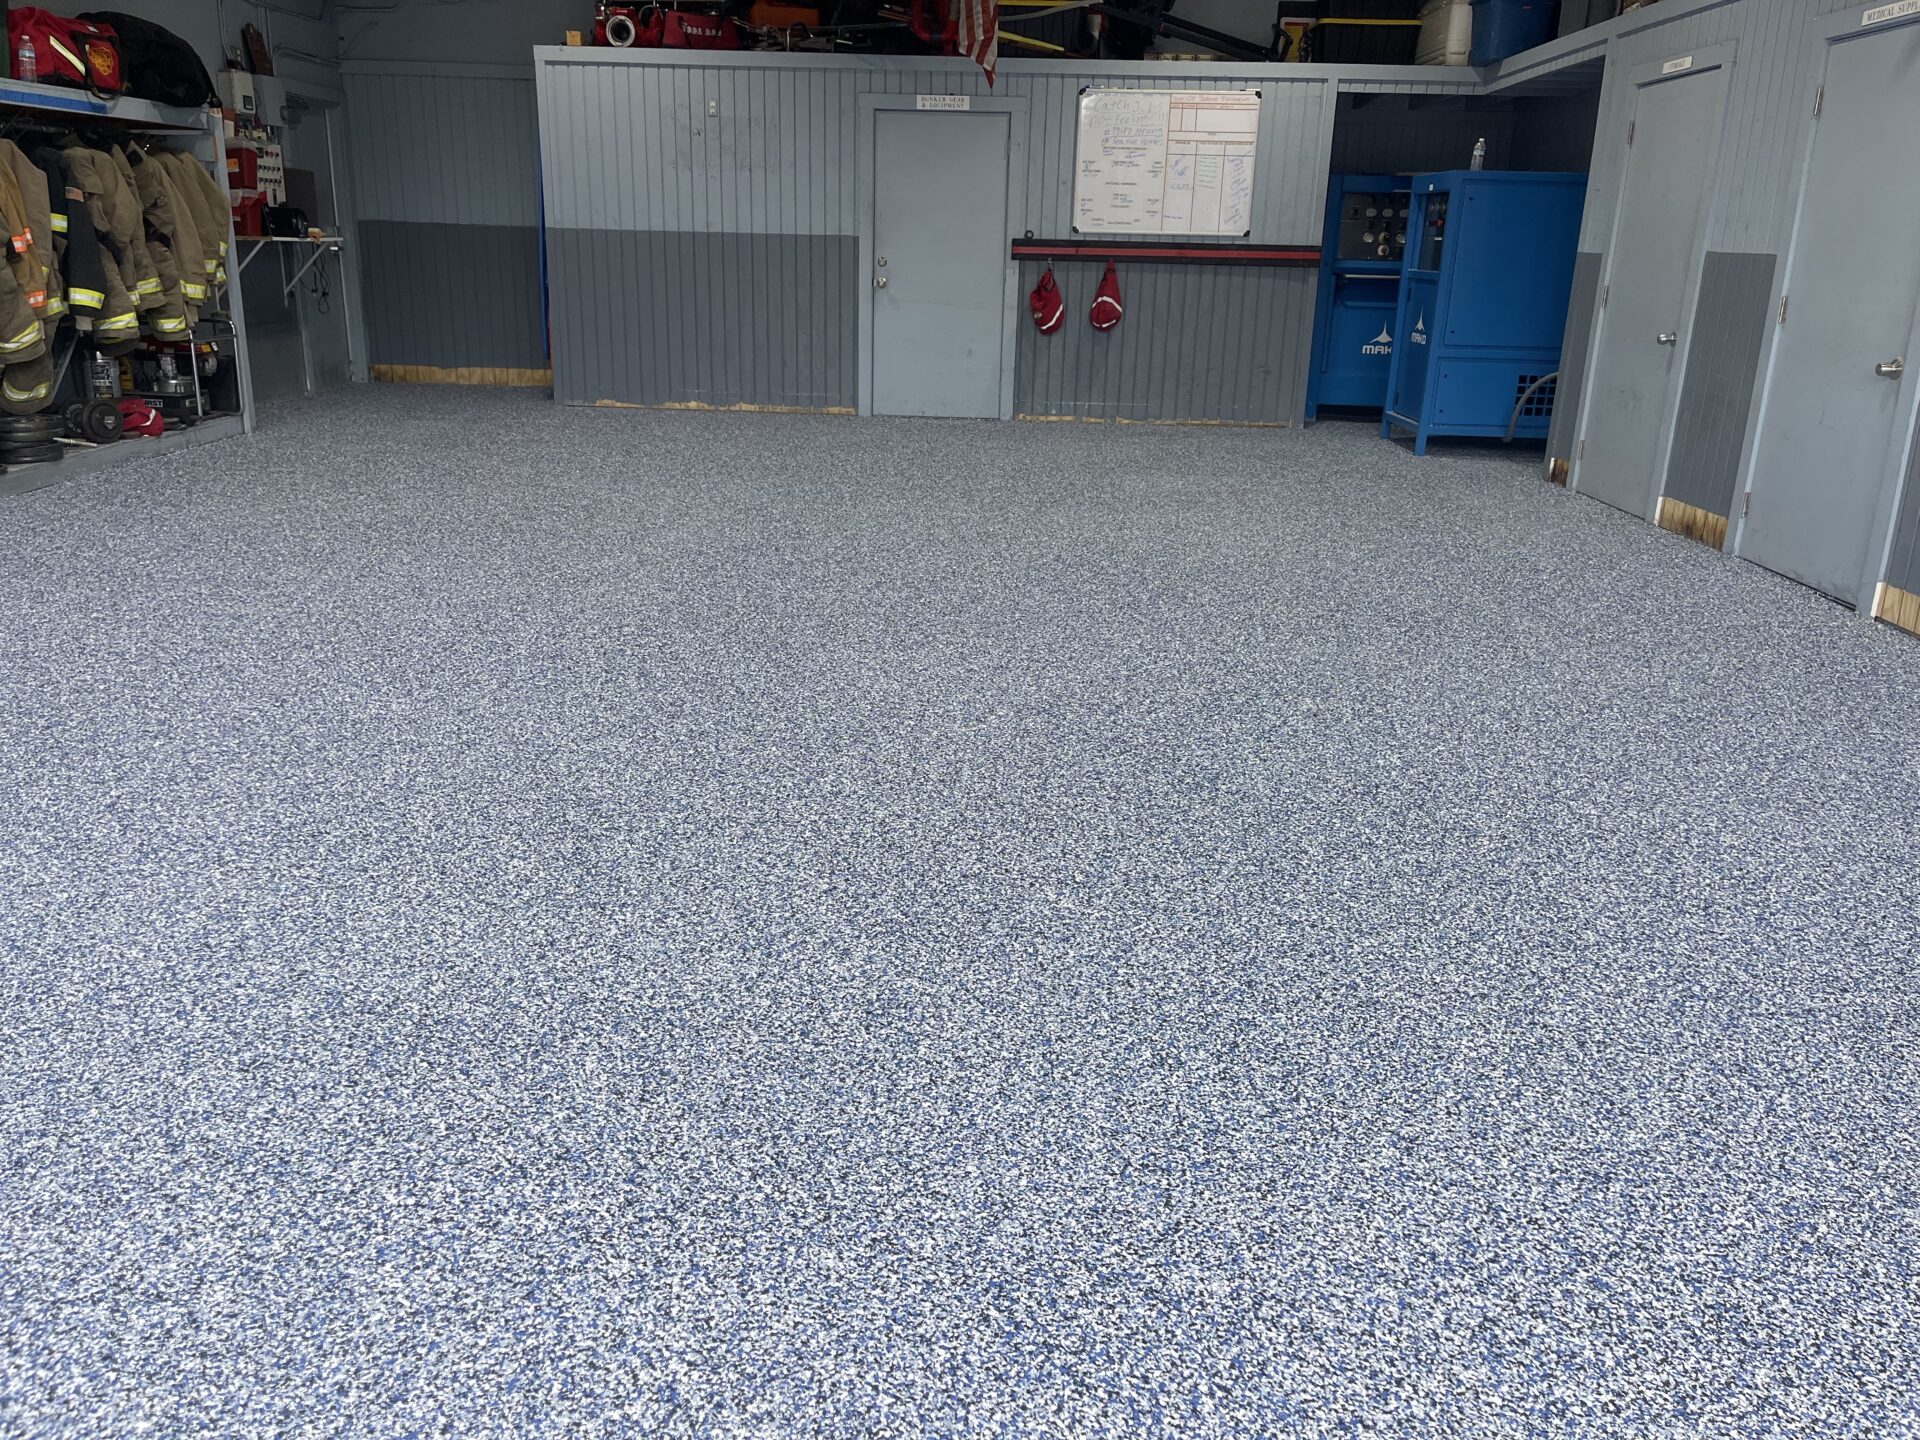 A garage floor with blue and white speckles.